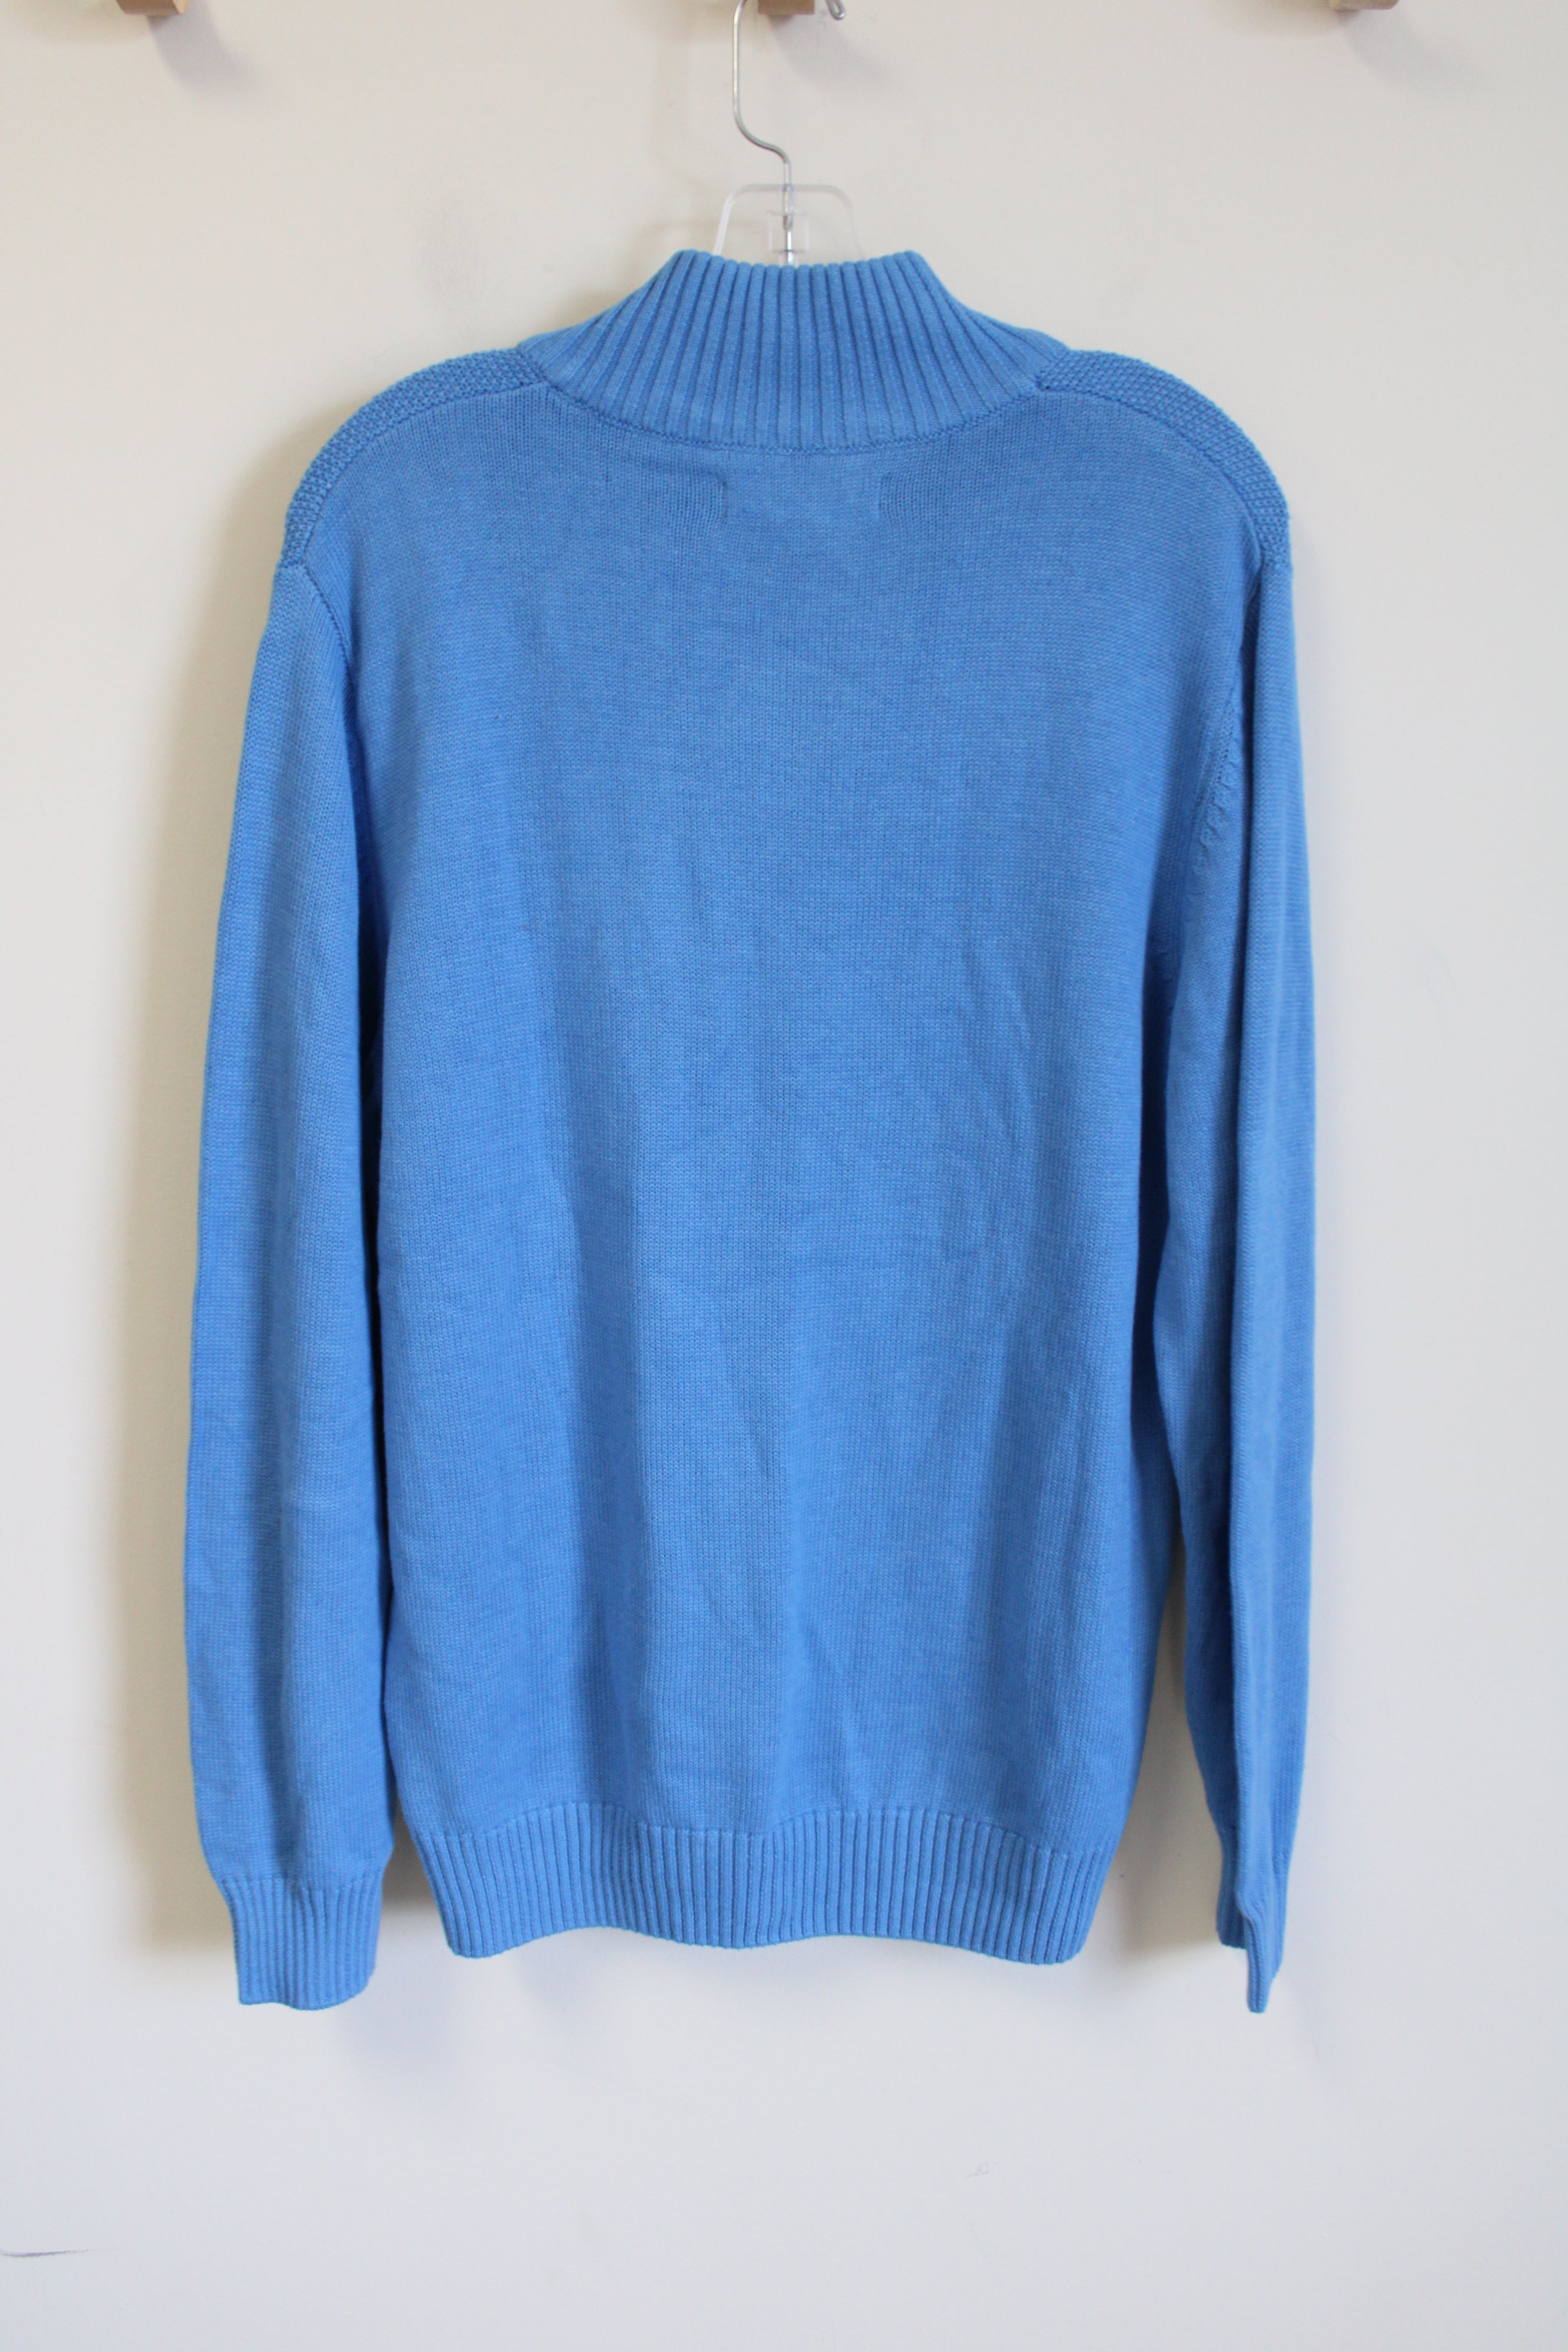 NEW U.S. Polo Assn. Blue Knit 1/4 Zip Pullover Sweater | S